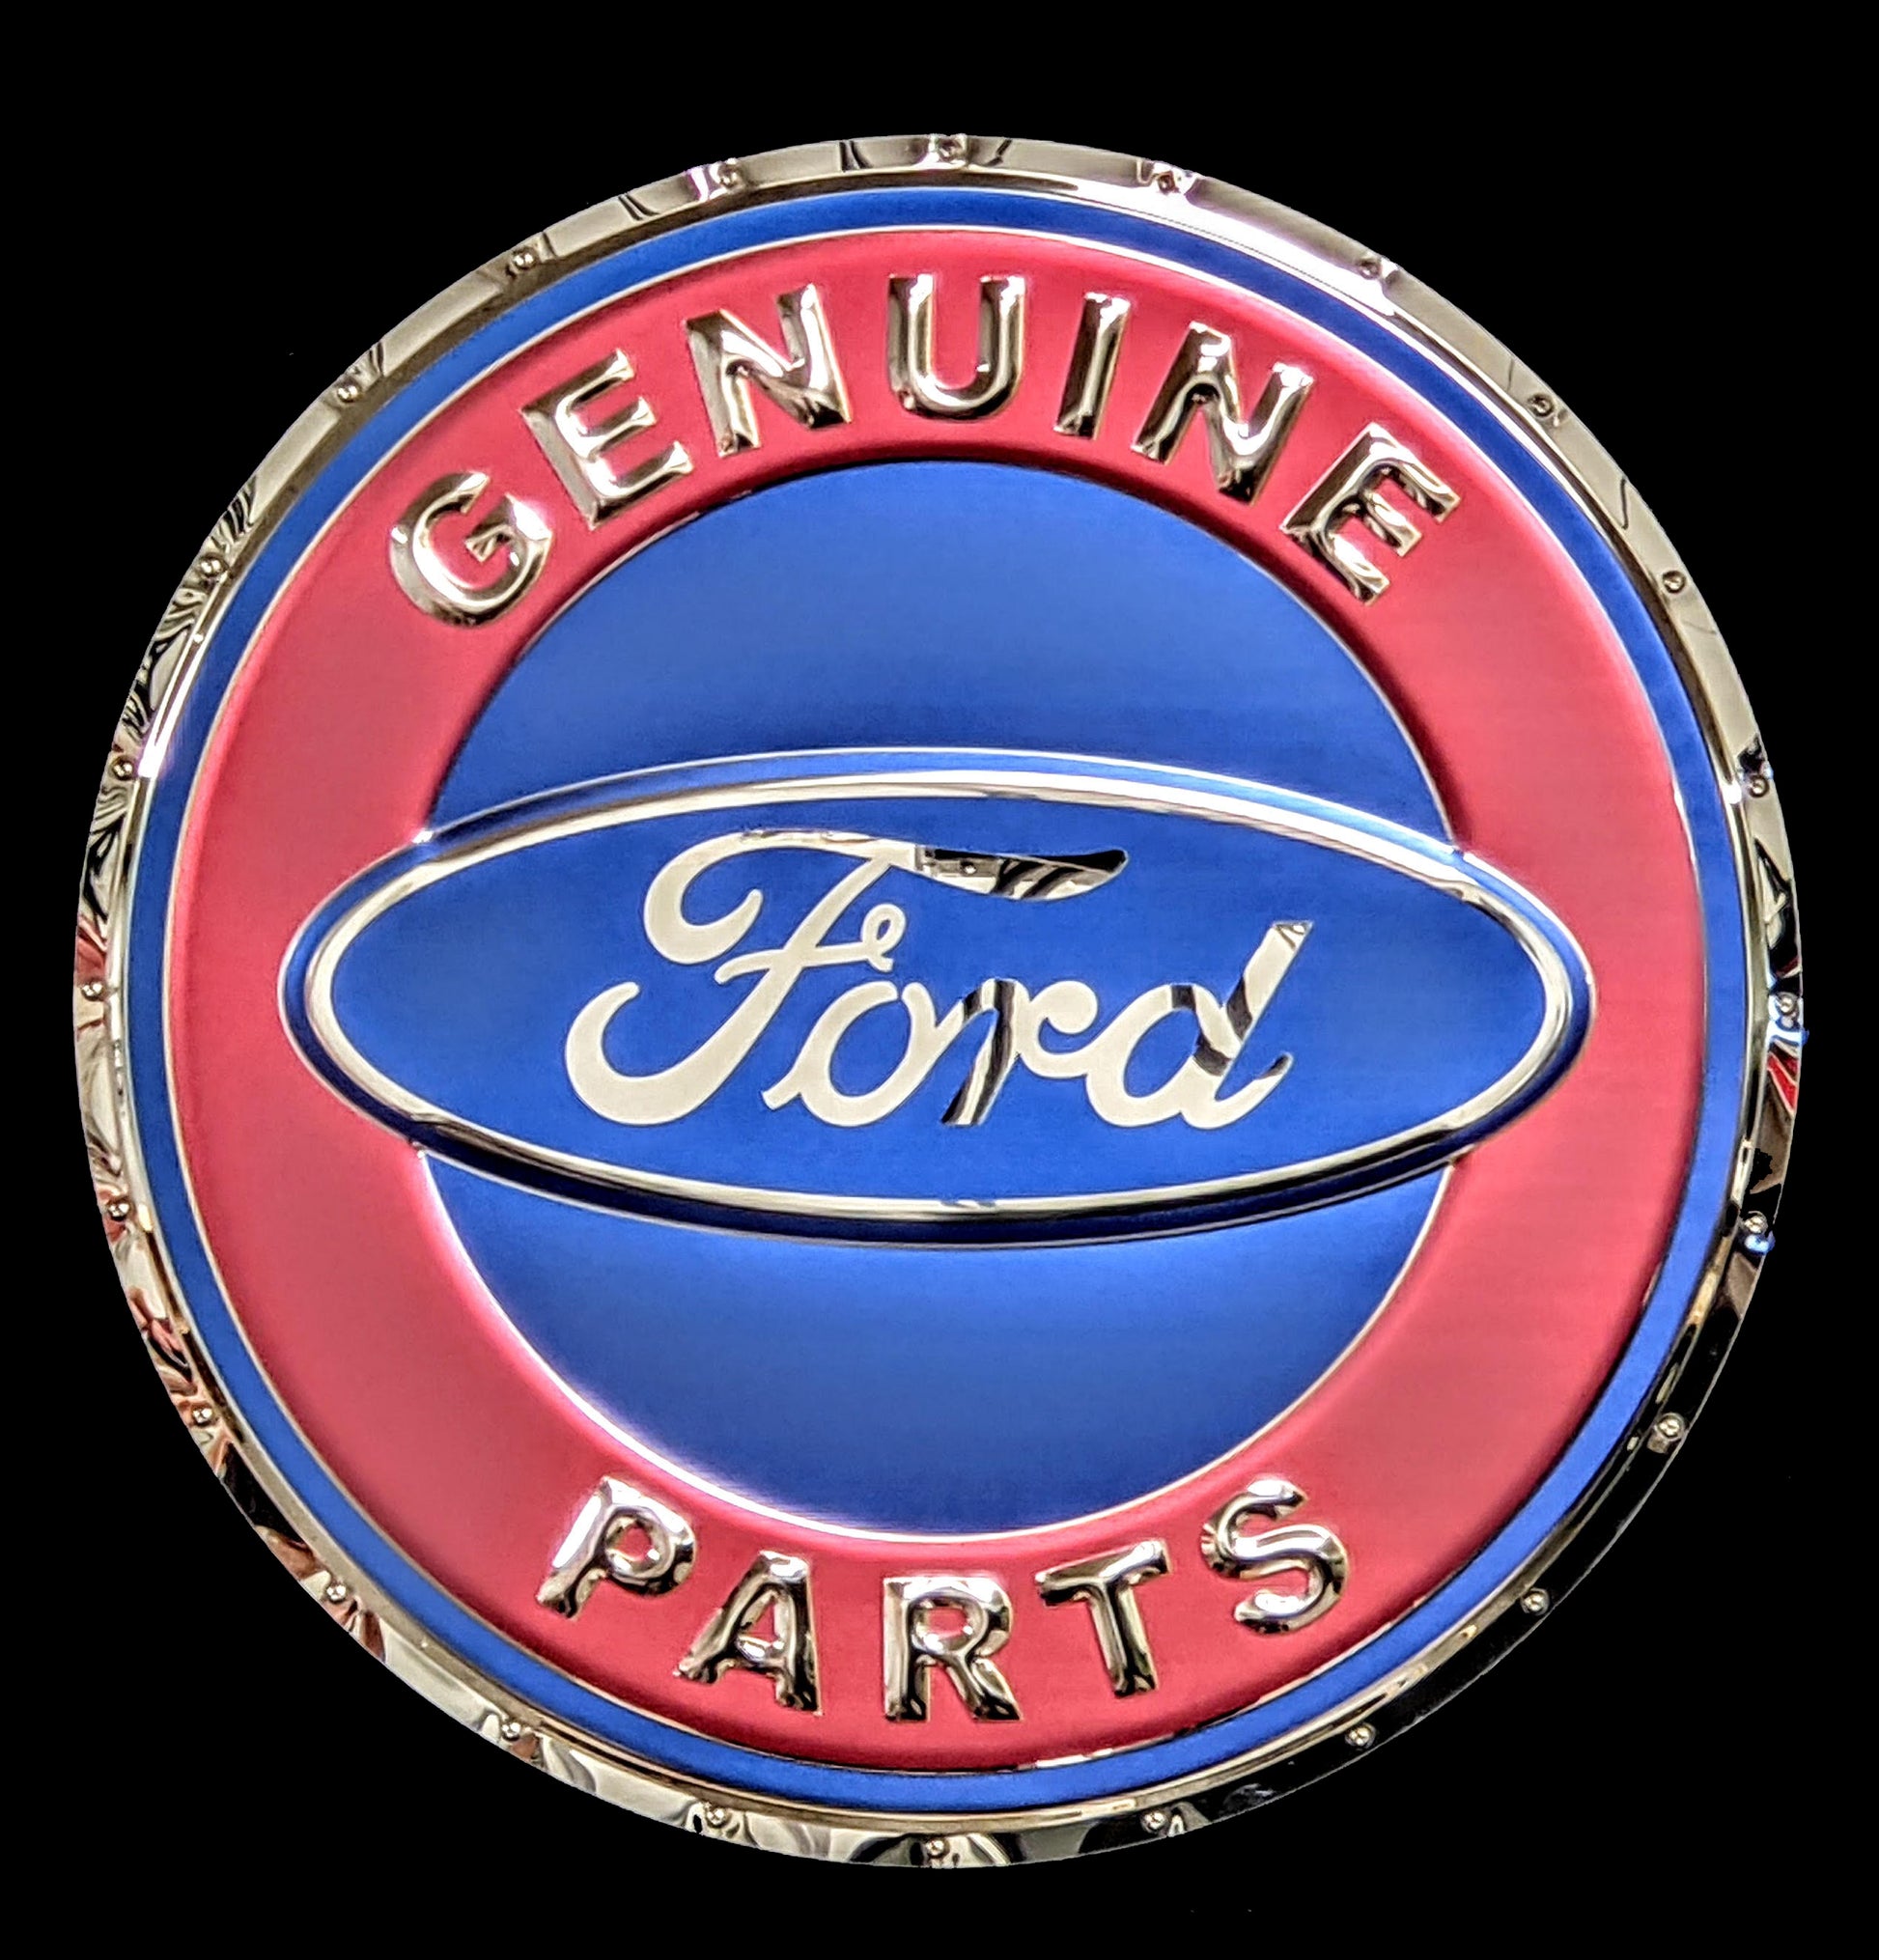 embossed mirror polished stainless steel sign décor ford parts